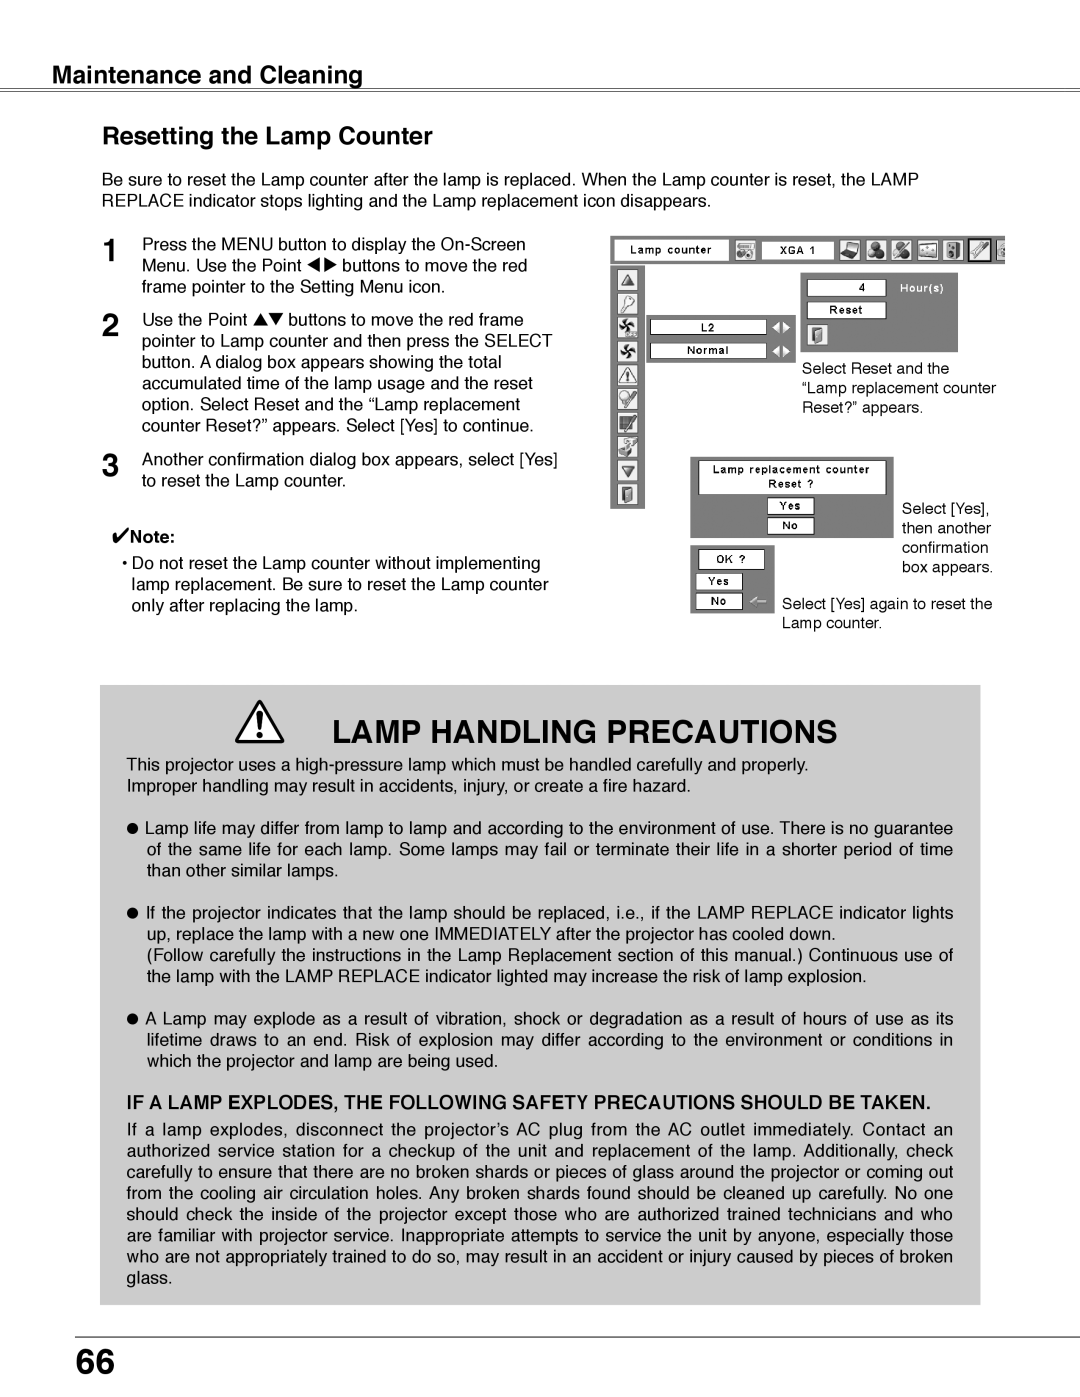 Eiki LC-WB40N owner manual Lamp Handling Precautions, Resetting the Lamp Counter, Maintenance and Cleaning 